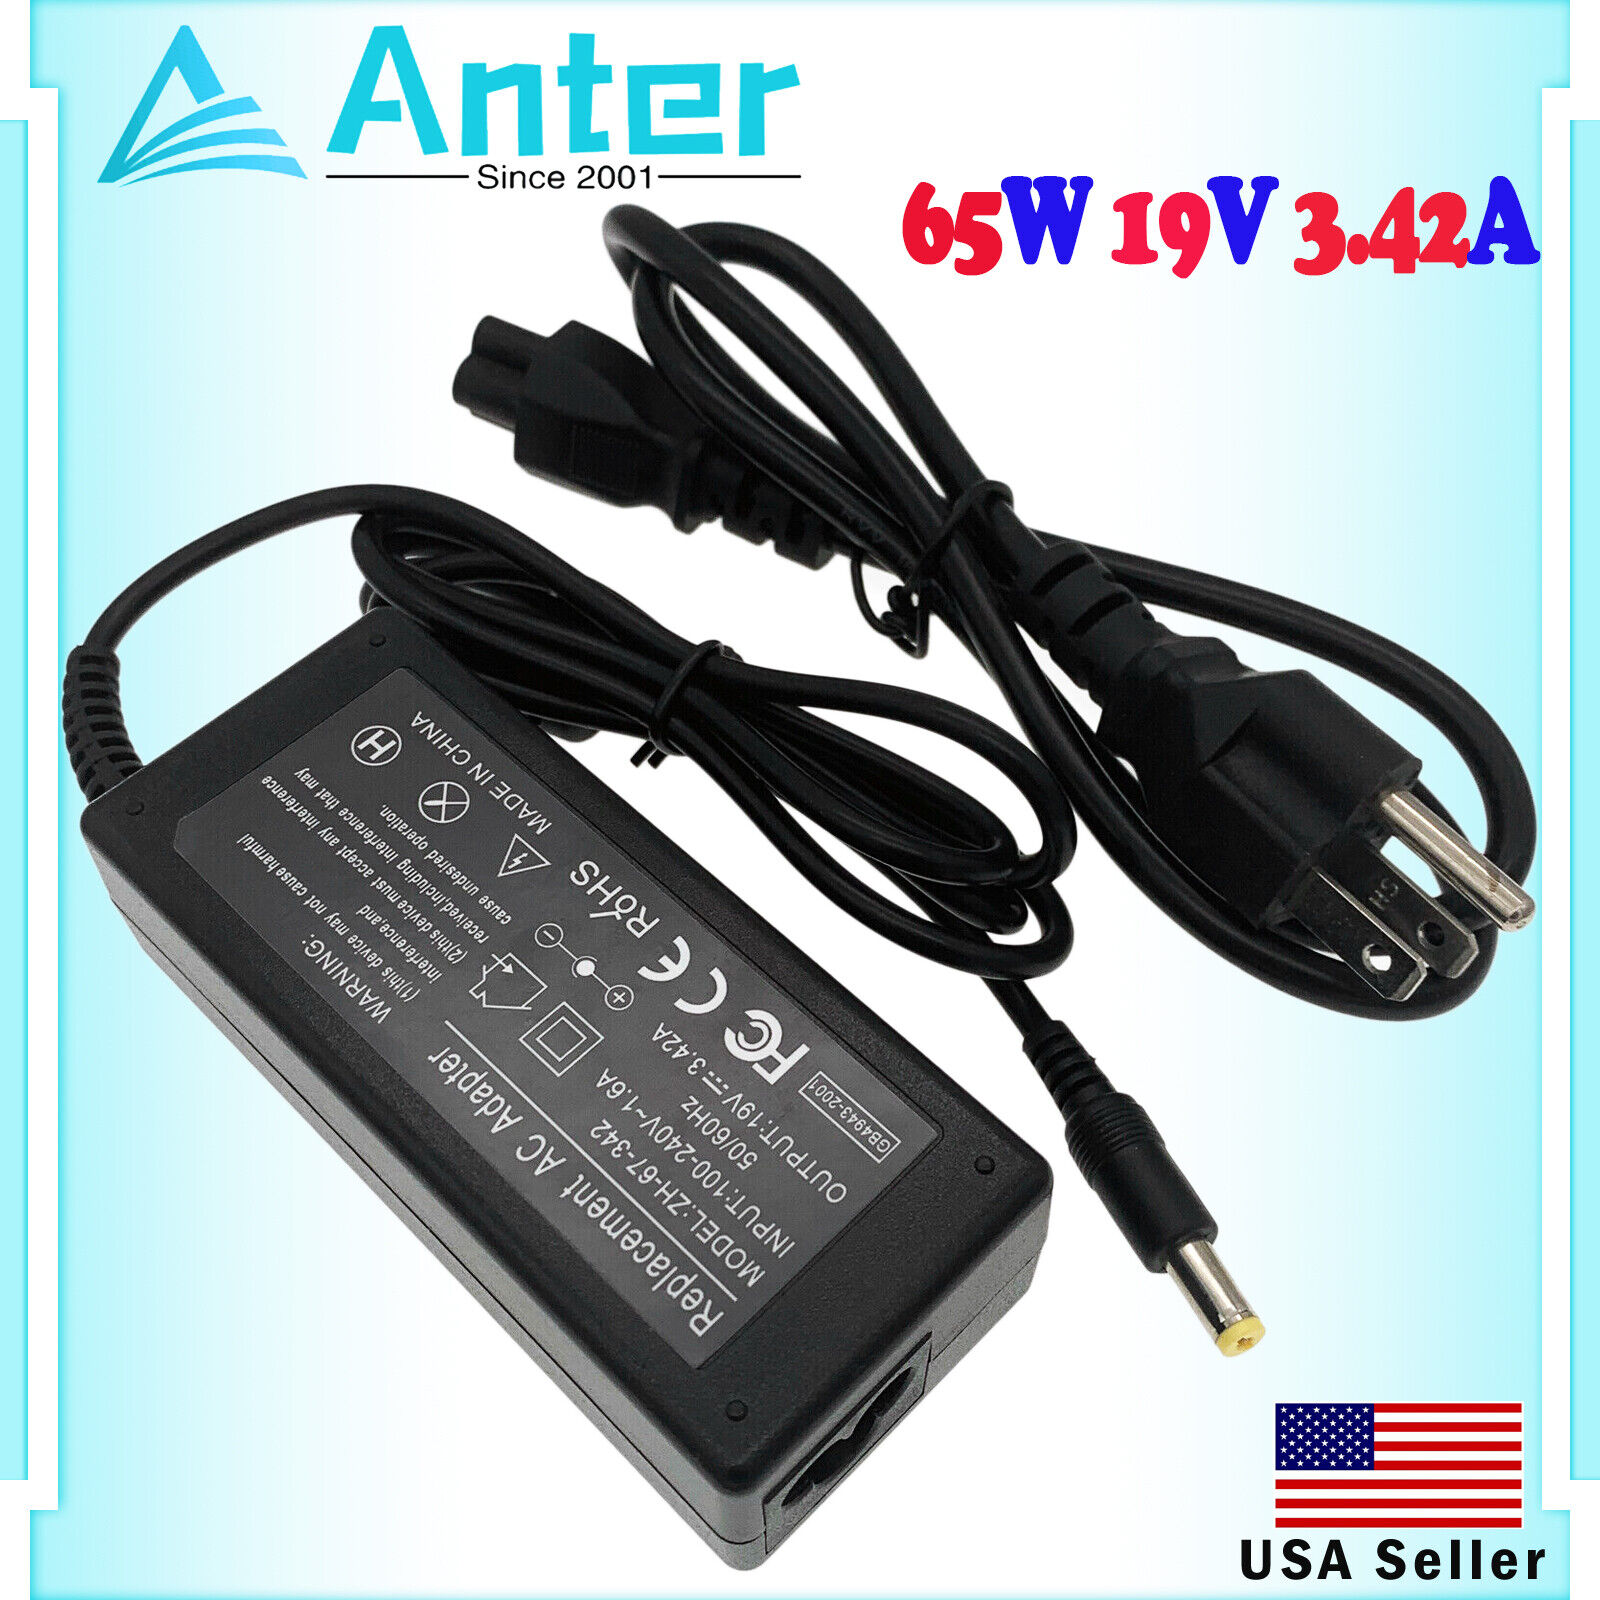 65W AC Adapter Charger For Gateway MS2274 MS2285 MS2288 Laptop Power Supply Cord